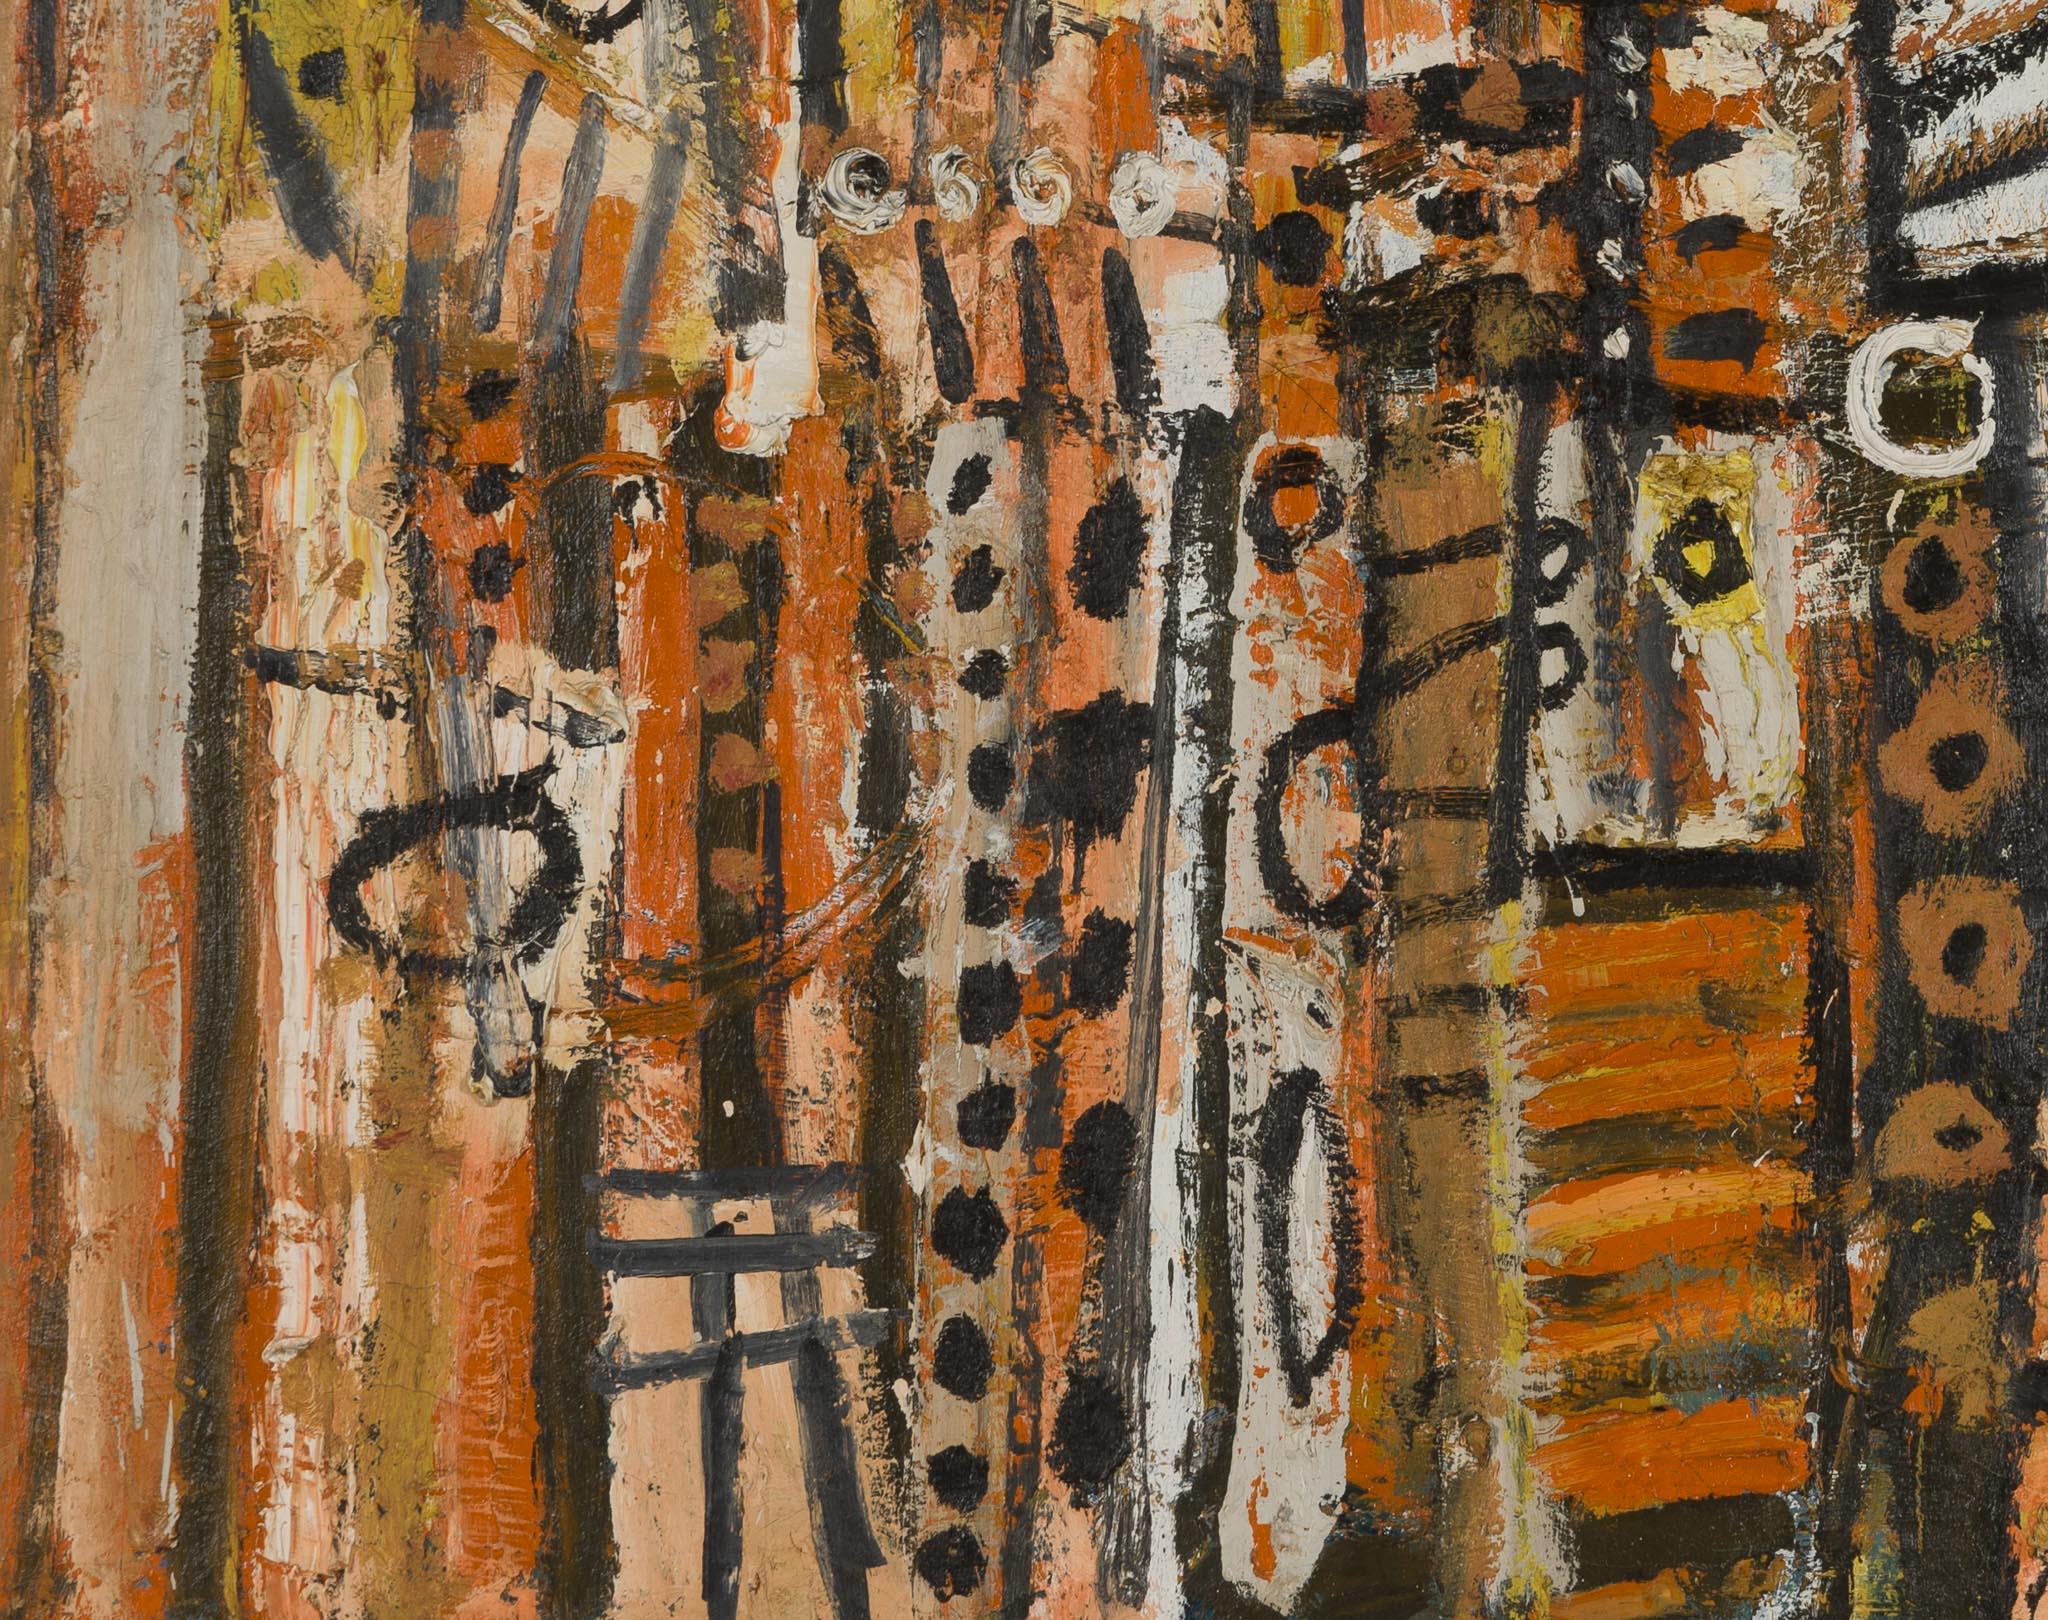 abstract painting of oranges, browns, and earth tones in a chaotic grid